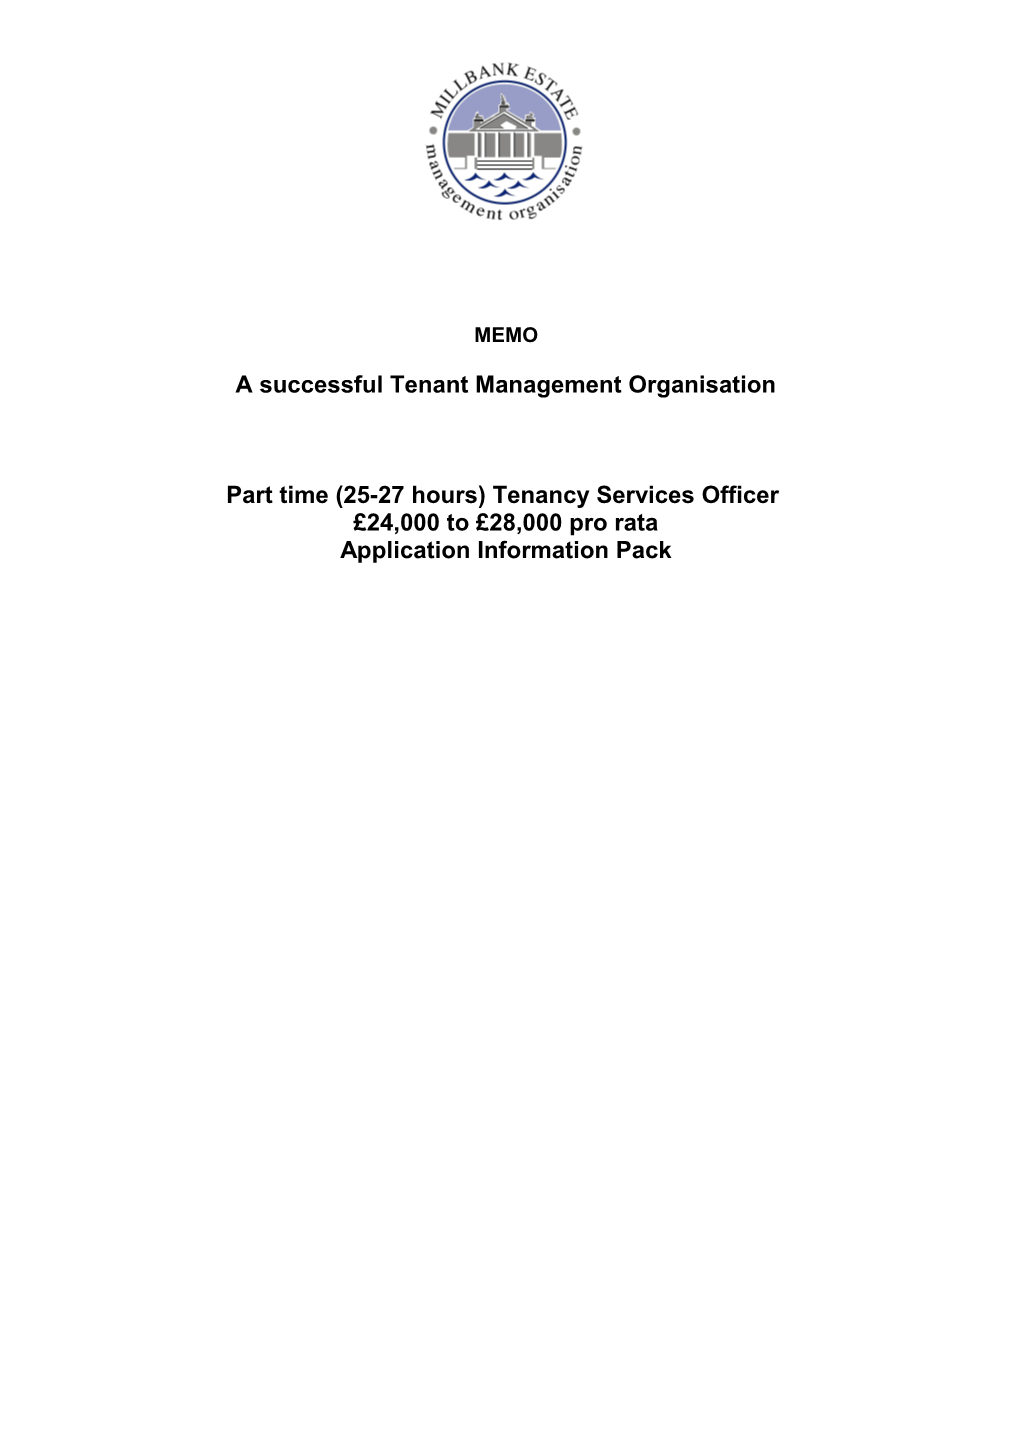 A Successful Tenant Management Organisation